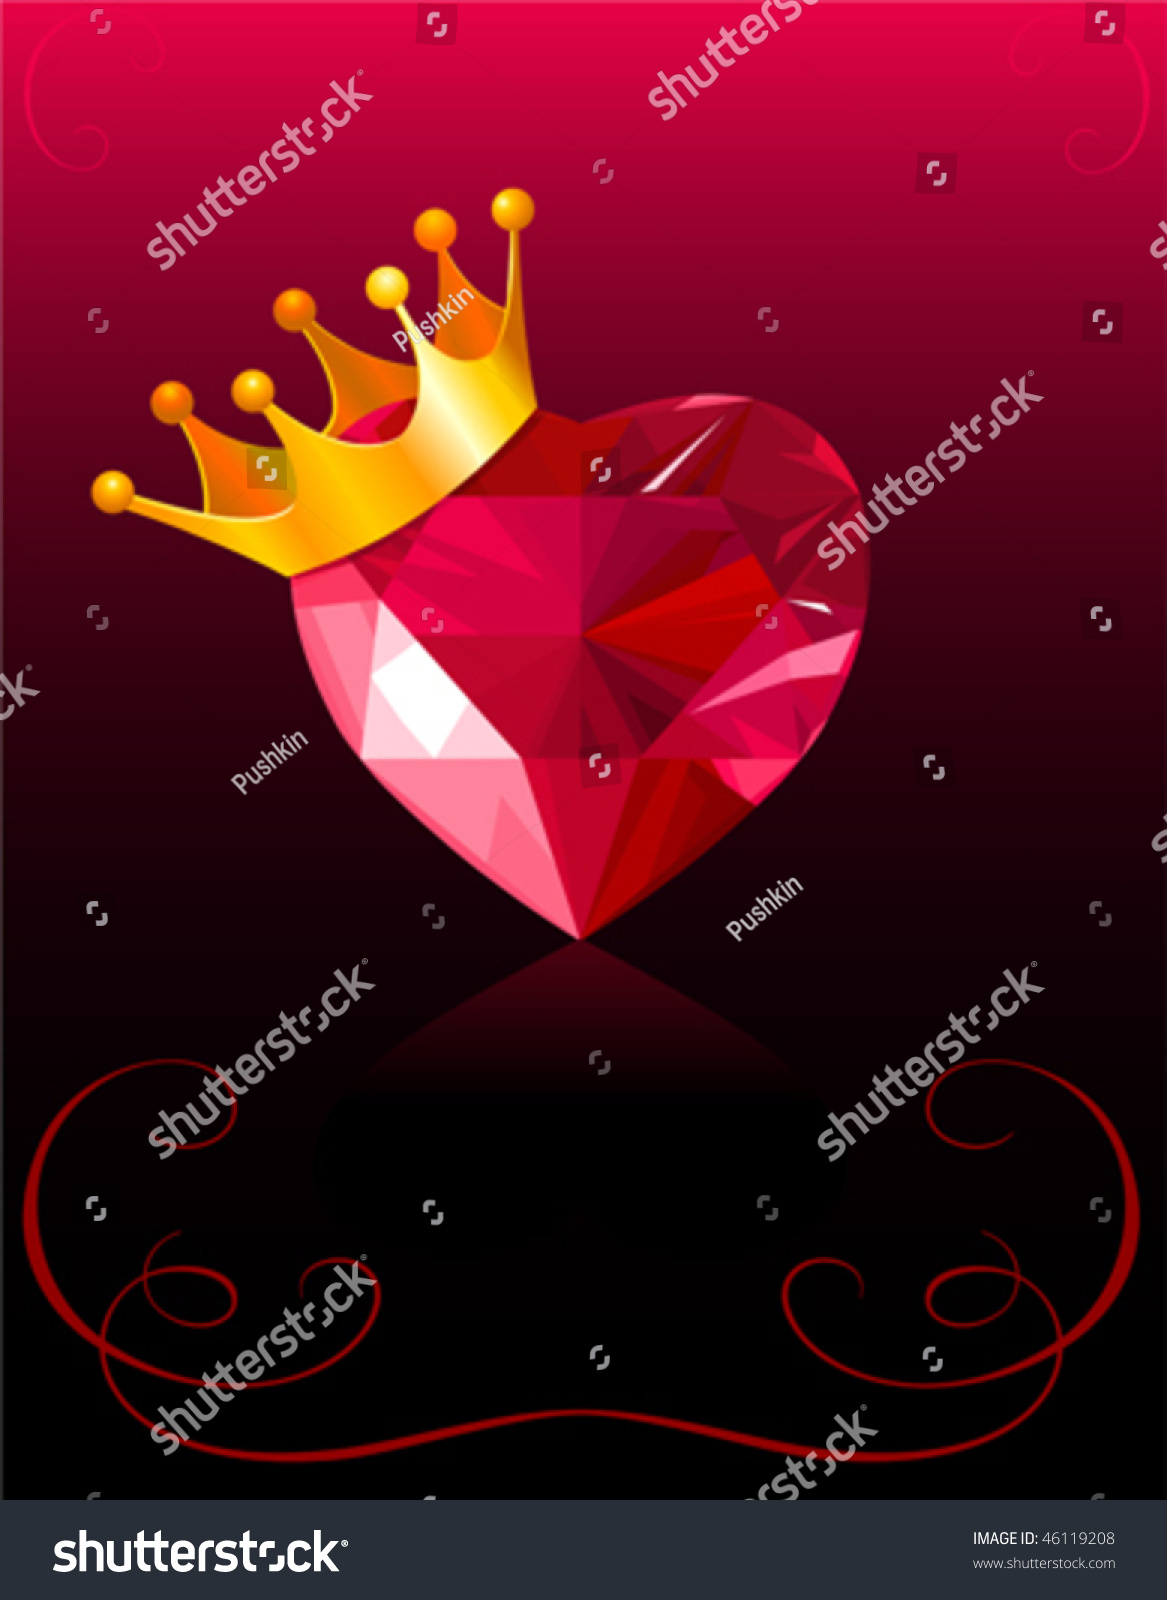 Shiny Crystal Love Heart With Gold Crown Stock Vector Illustration ...